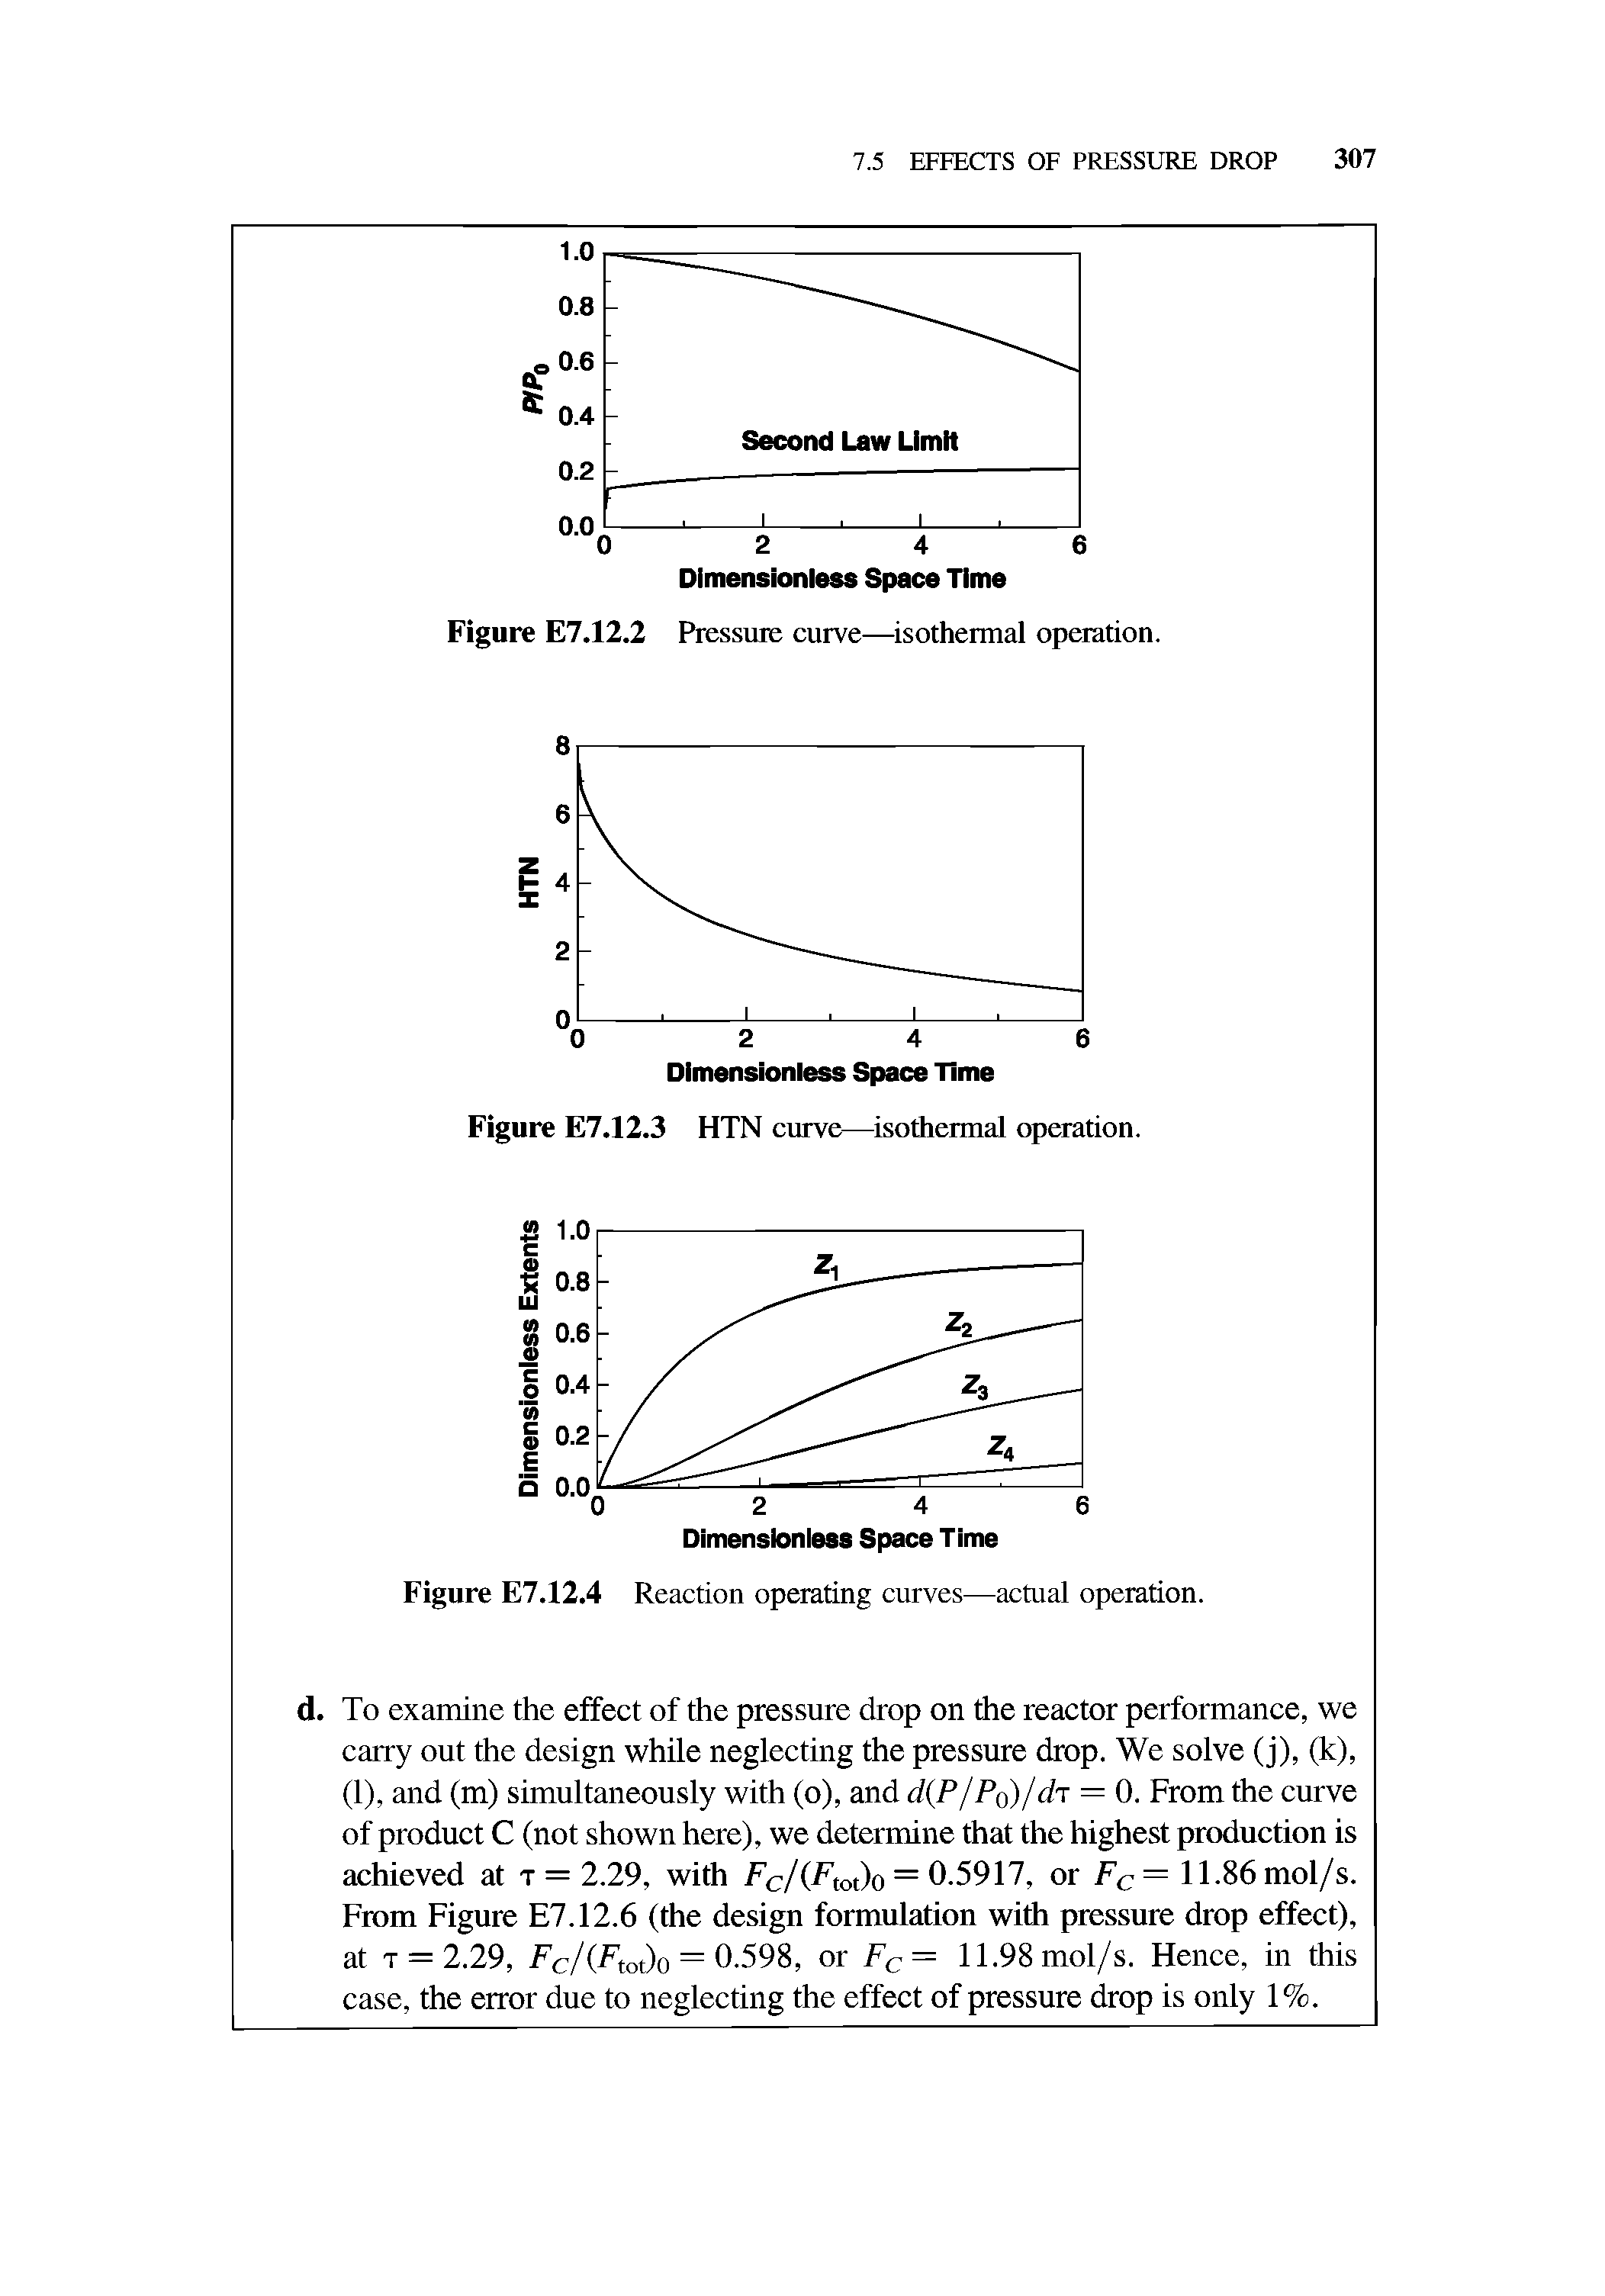 Figure E7.12.4 Reaction operating curves—actual operation.